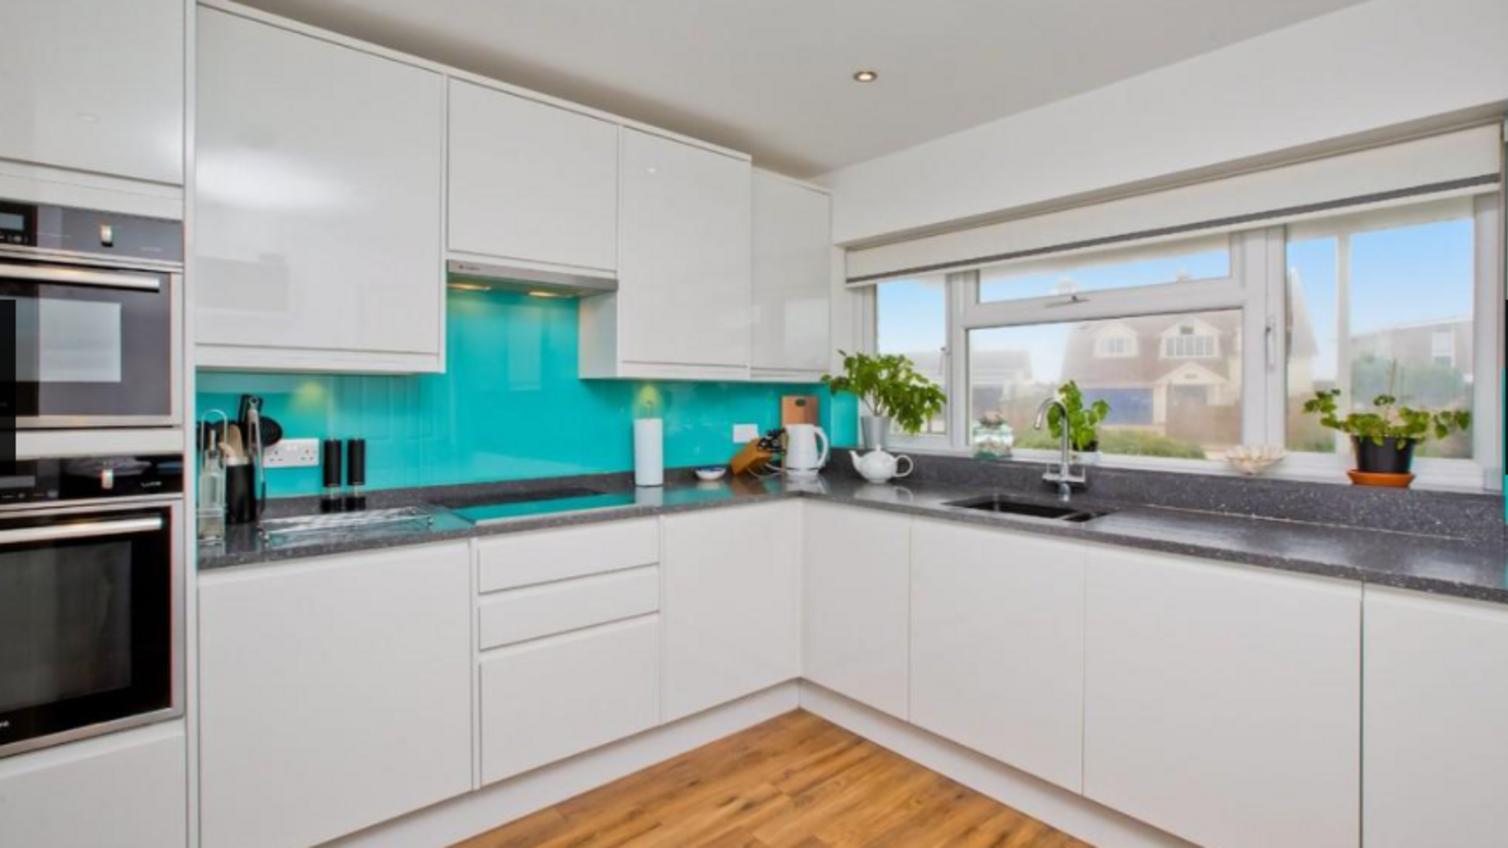 White integrated handle gloss kitchen in an l-shaped layout, with grey laminate worktops, and an aqua backsplash.